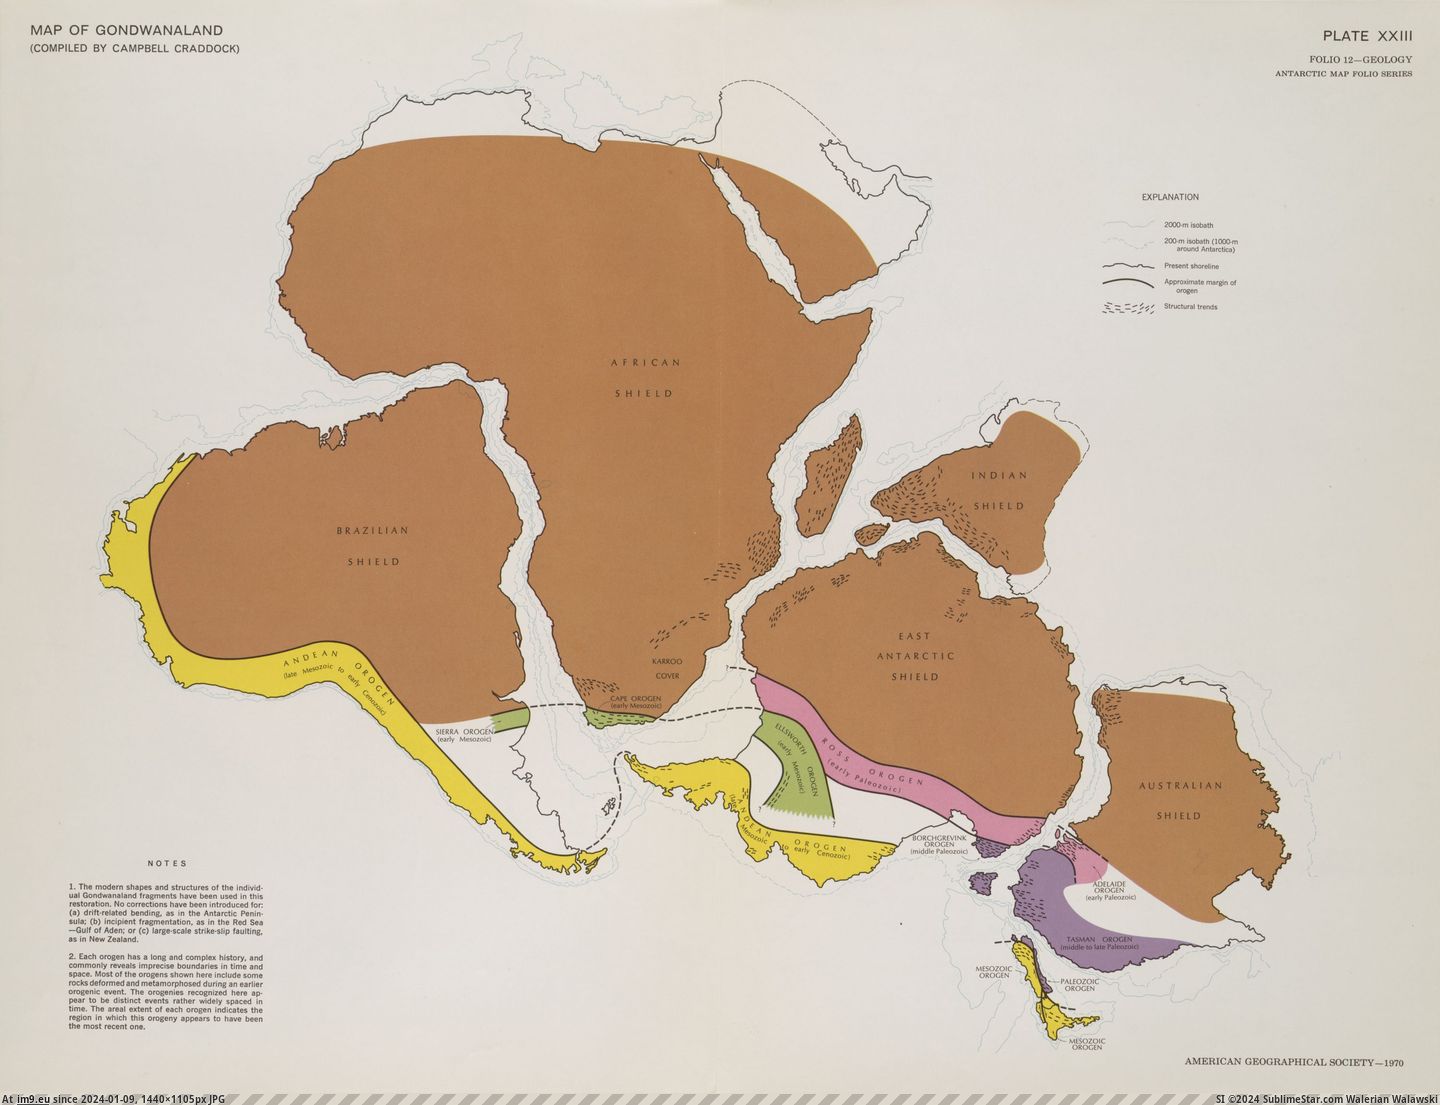 [Mapporn] Map of Gondwanaland (compiled by Campbell Craddock). American Geographical Society, 1970. [3000x2278] (in My r/MAPS favs)